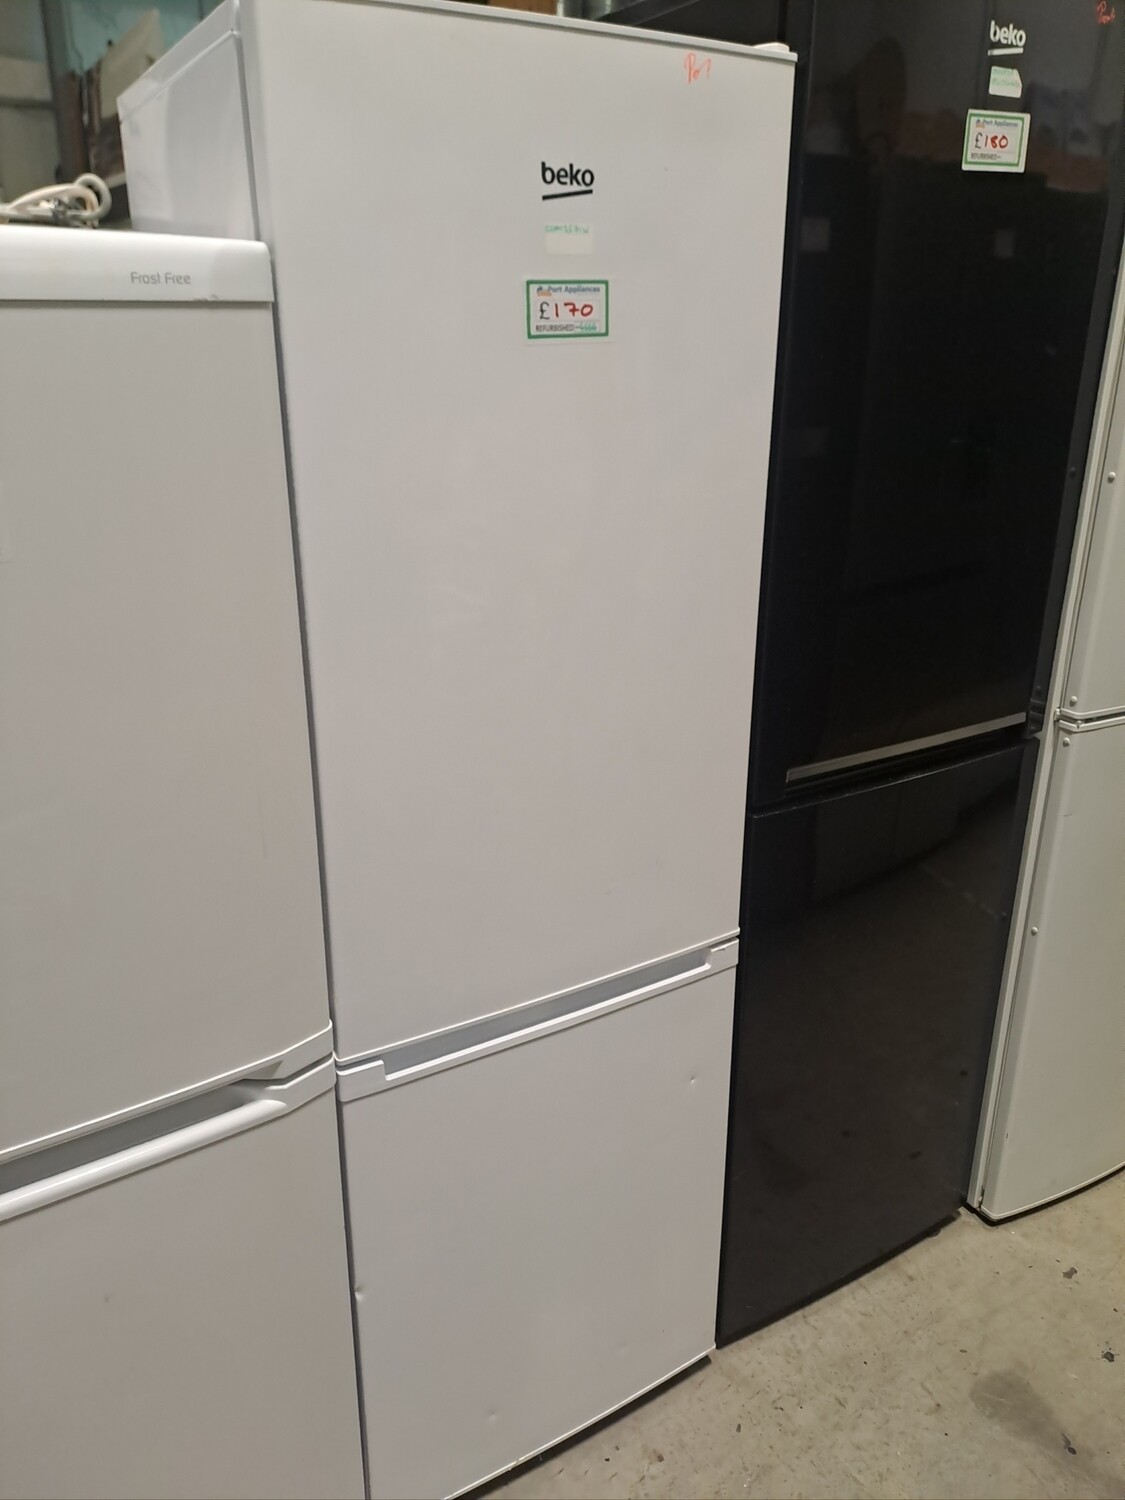 Beko CCFM3571W Fridge Freezer White H172 x W55 x D62 Refurbished 6 Month Guarantee. This item is located in our Whitby Road Shop